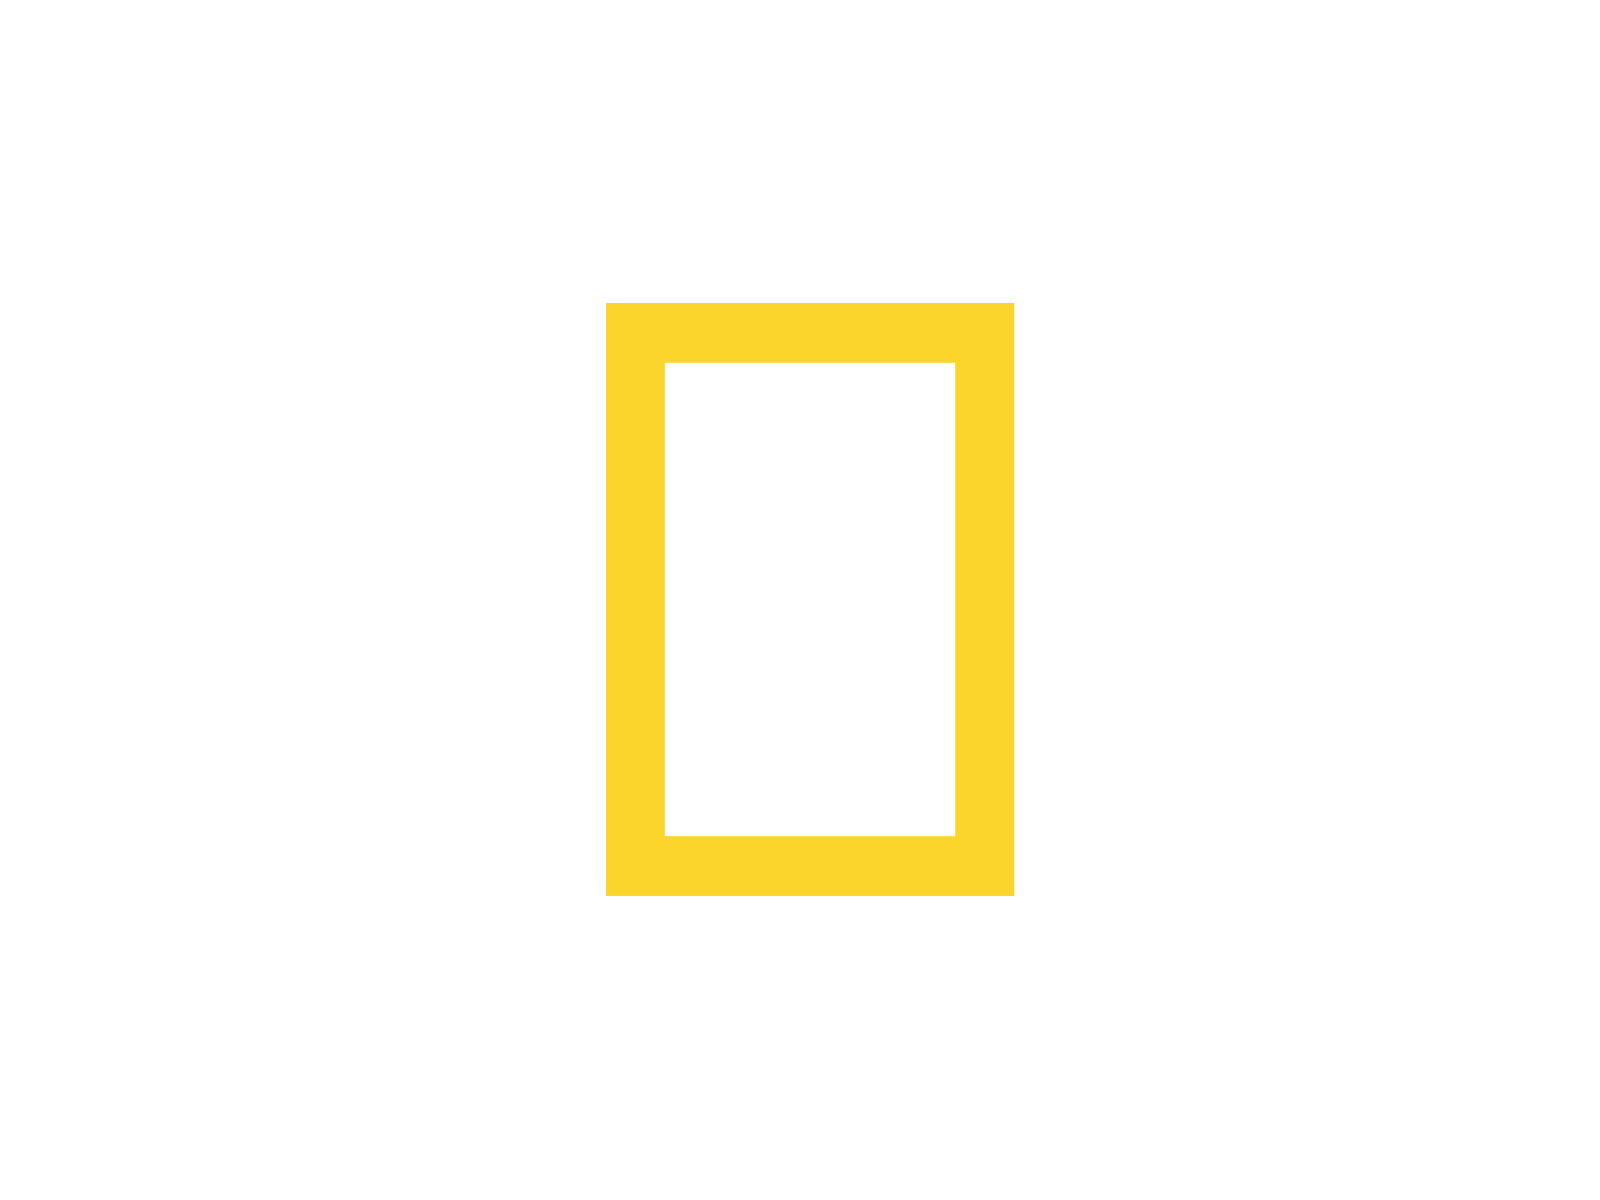 Yellow Square Channel Logo - National Geographic logo | Logok